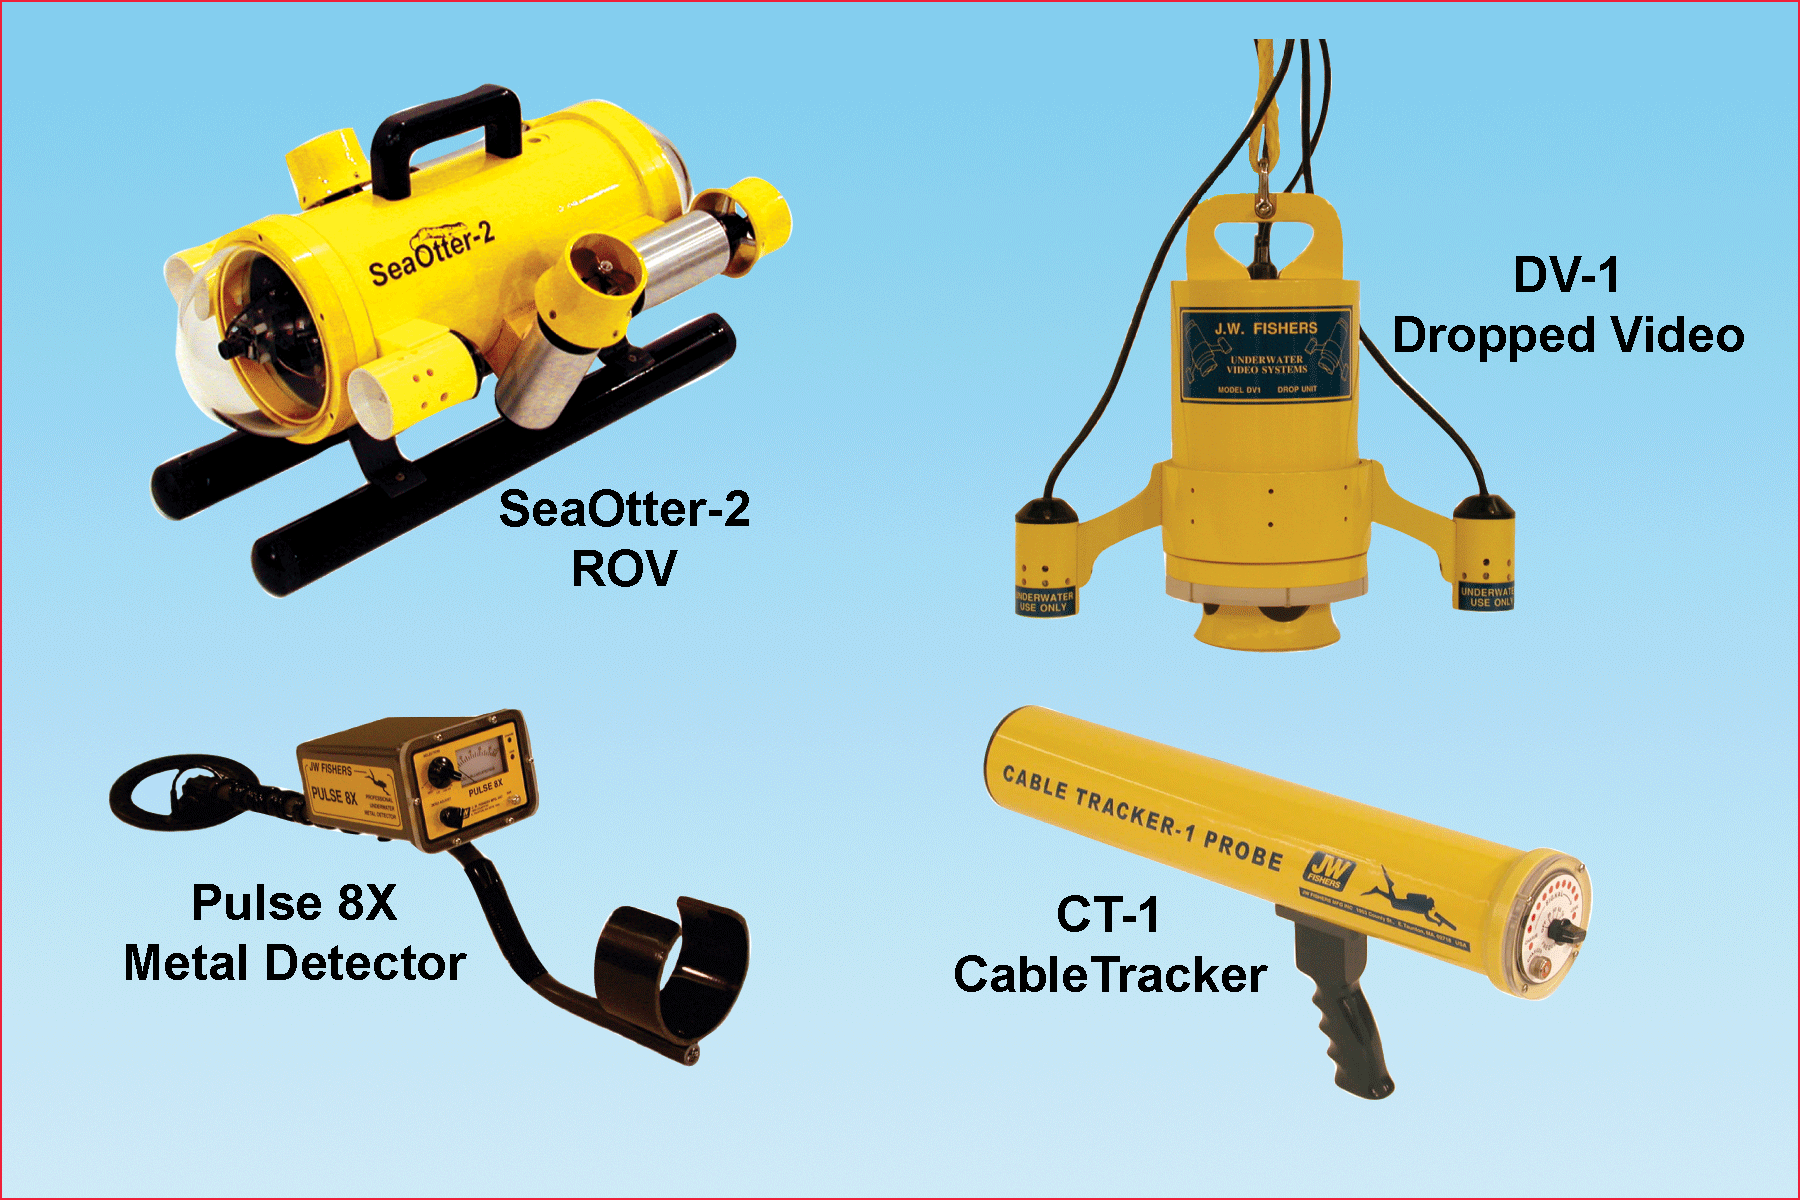 (Top Left) SeaOtter-2 ROV; (Top Right) DV-1 Dropped Video; (Bottom Left) Pulse 8X Metal Detector; (Bottom Right) CT-1 Cable Tracker